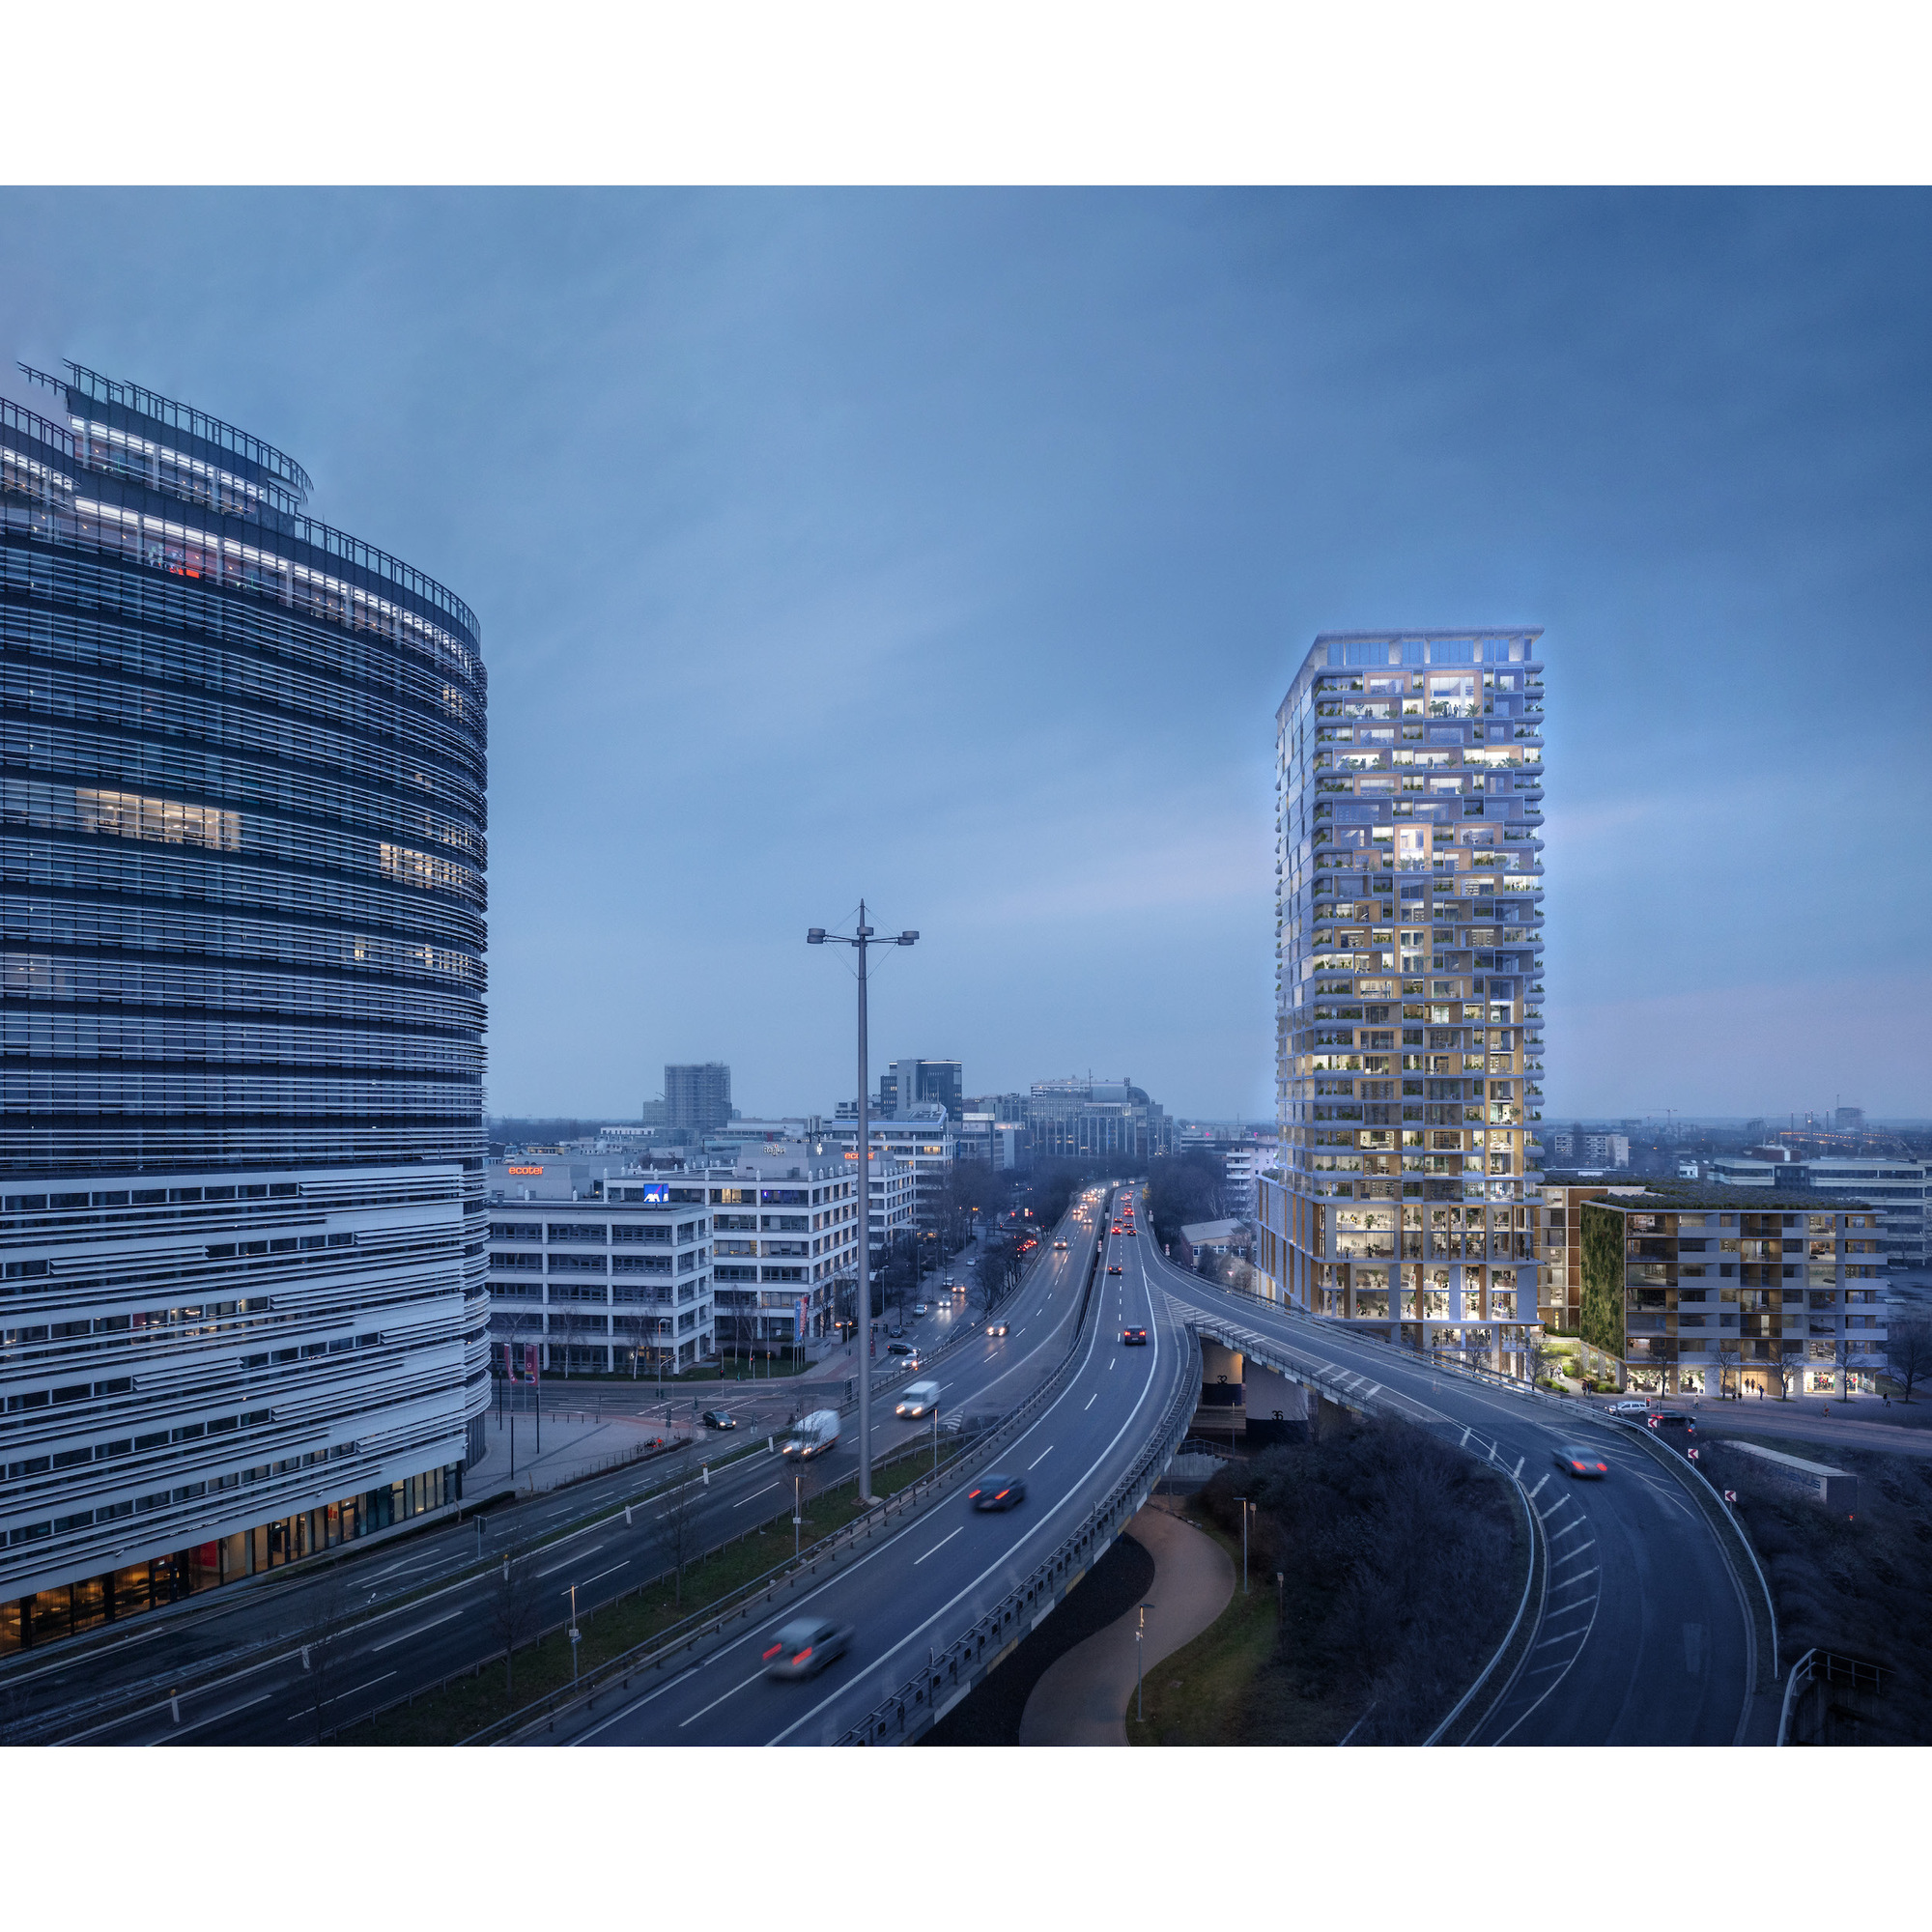 UNStudio Wins Competition for New Mixed-Use Tower in Dusseldorf